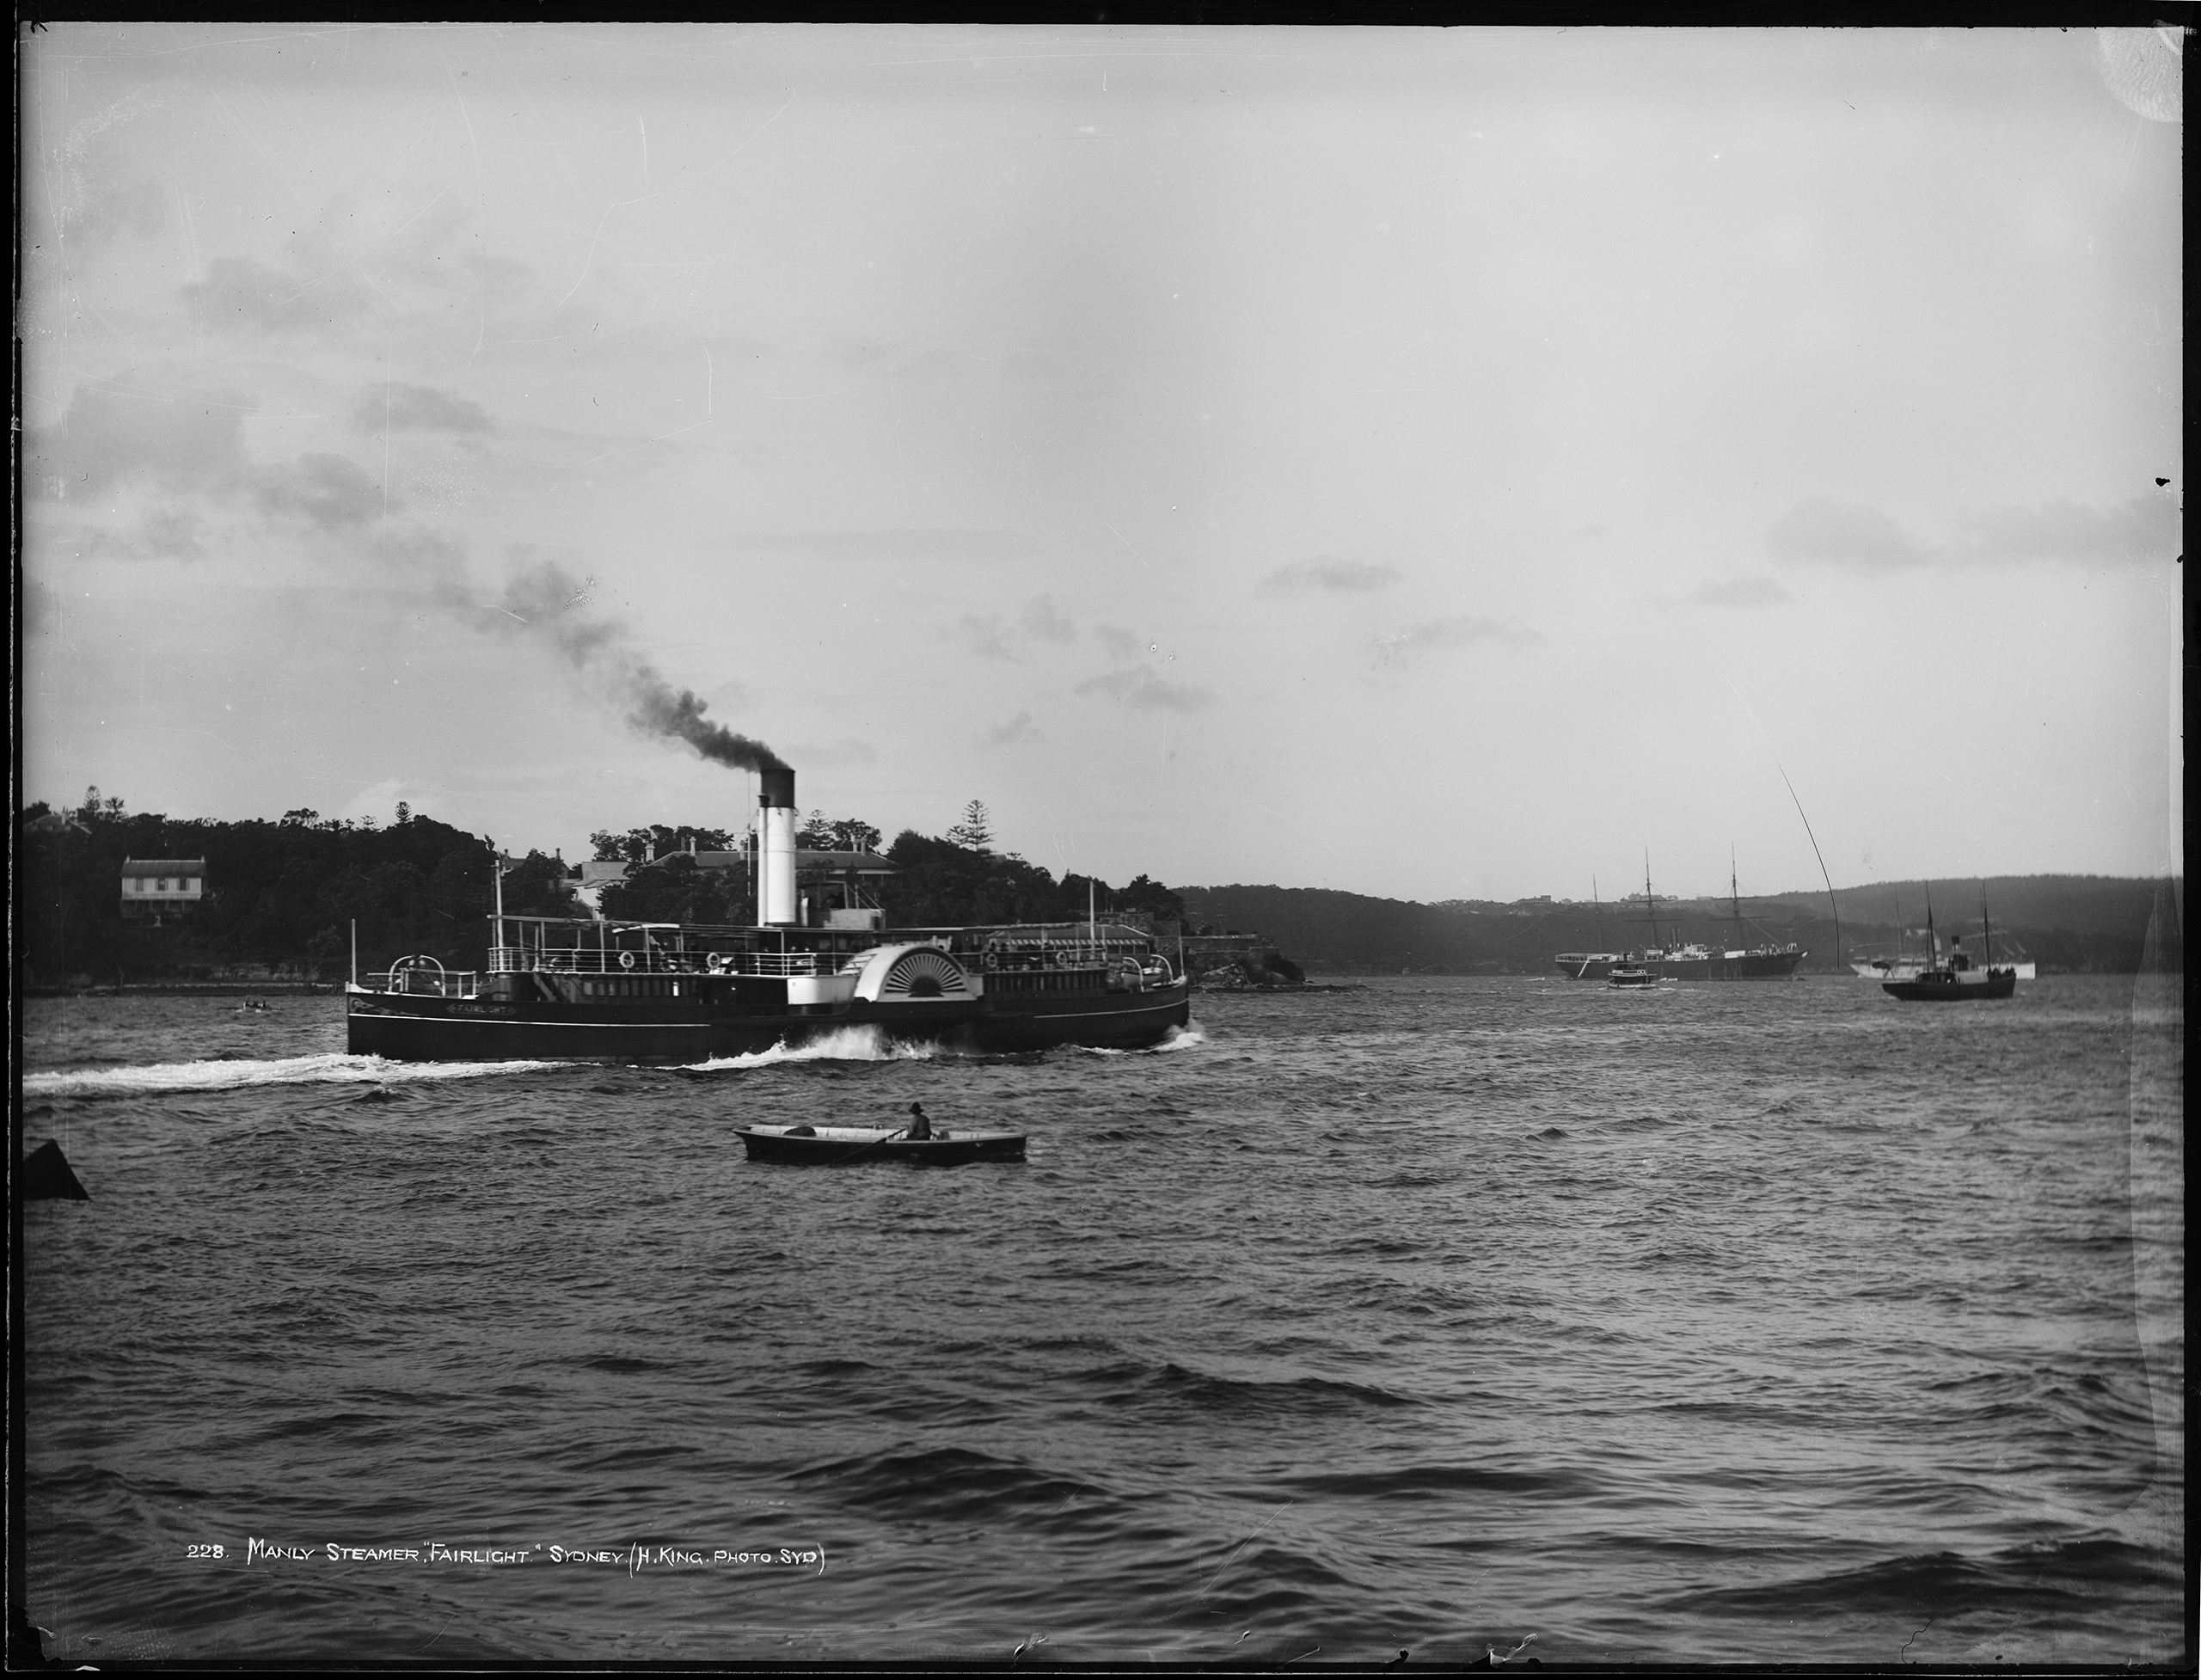 Glass plate negative of Manly ferry paddle steamer 'Fairlight' on Sydney Harbour heading to Manly, c.1885